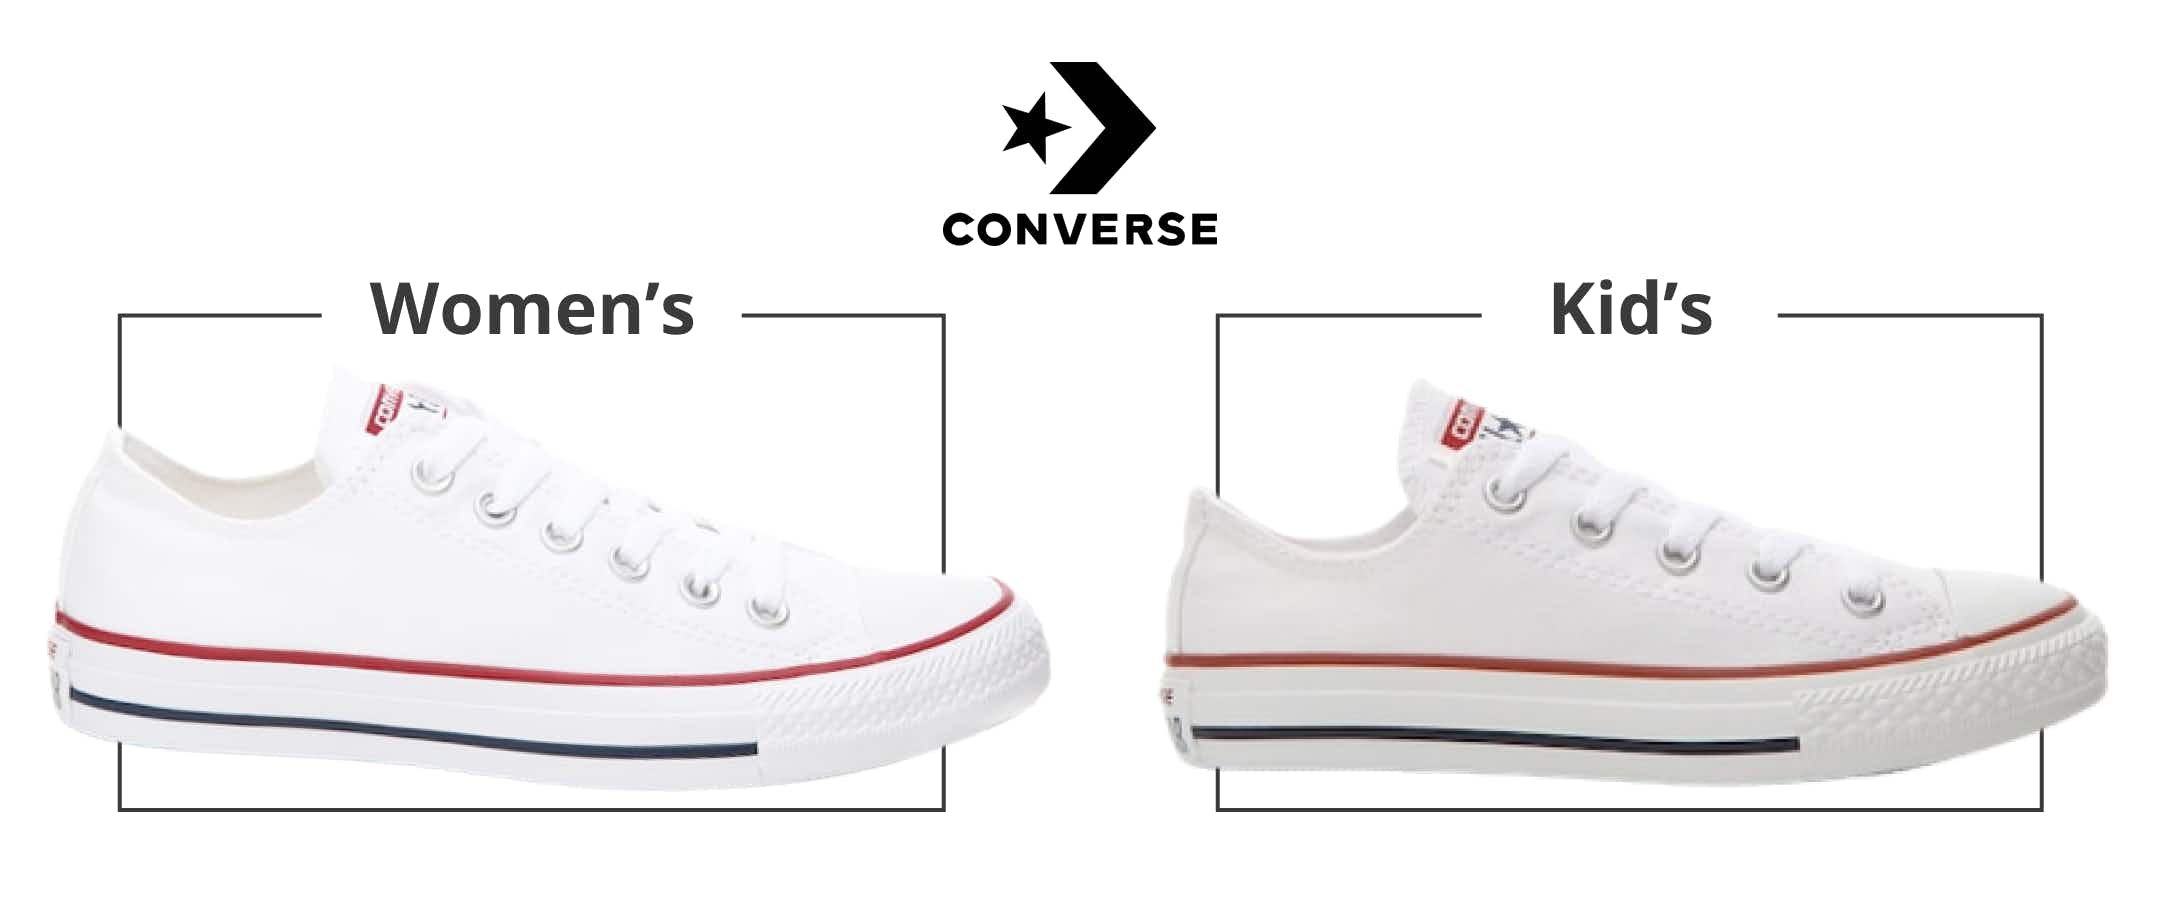 A comparison of a kid's and women's converse shoe